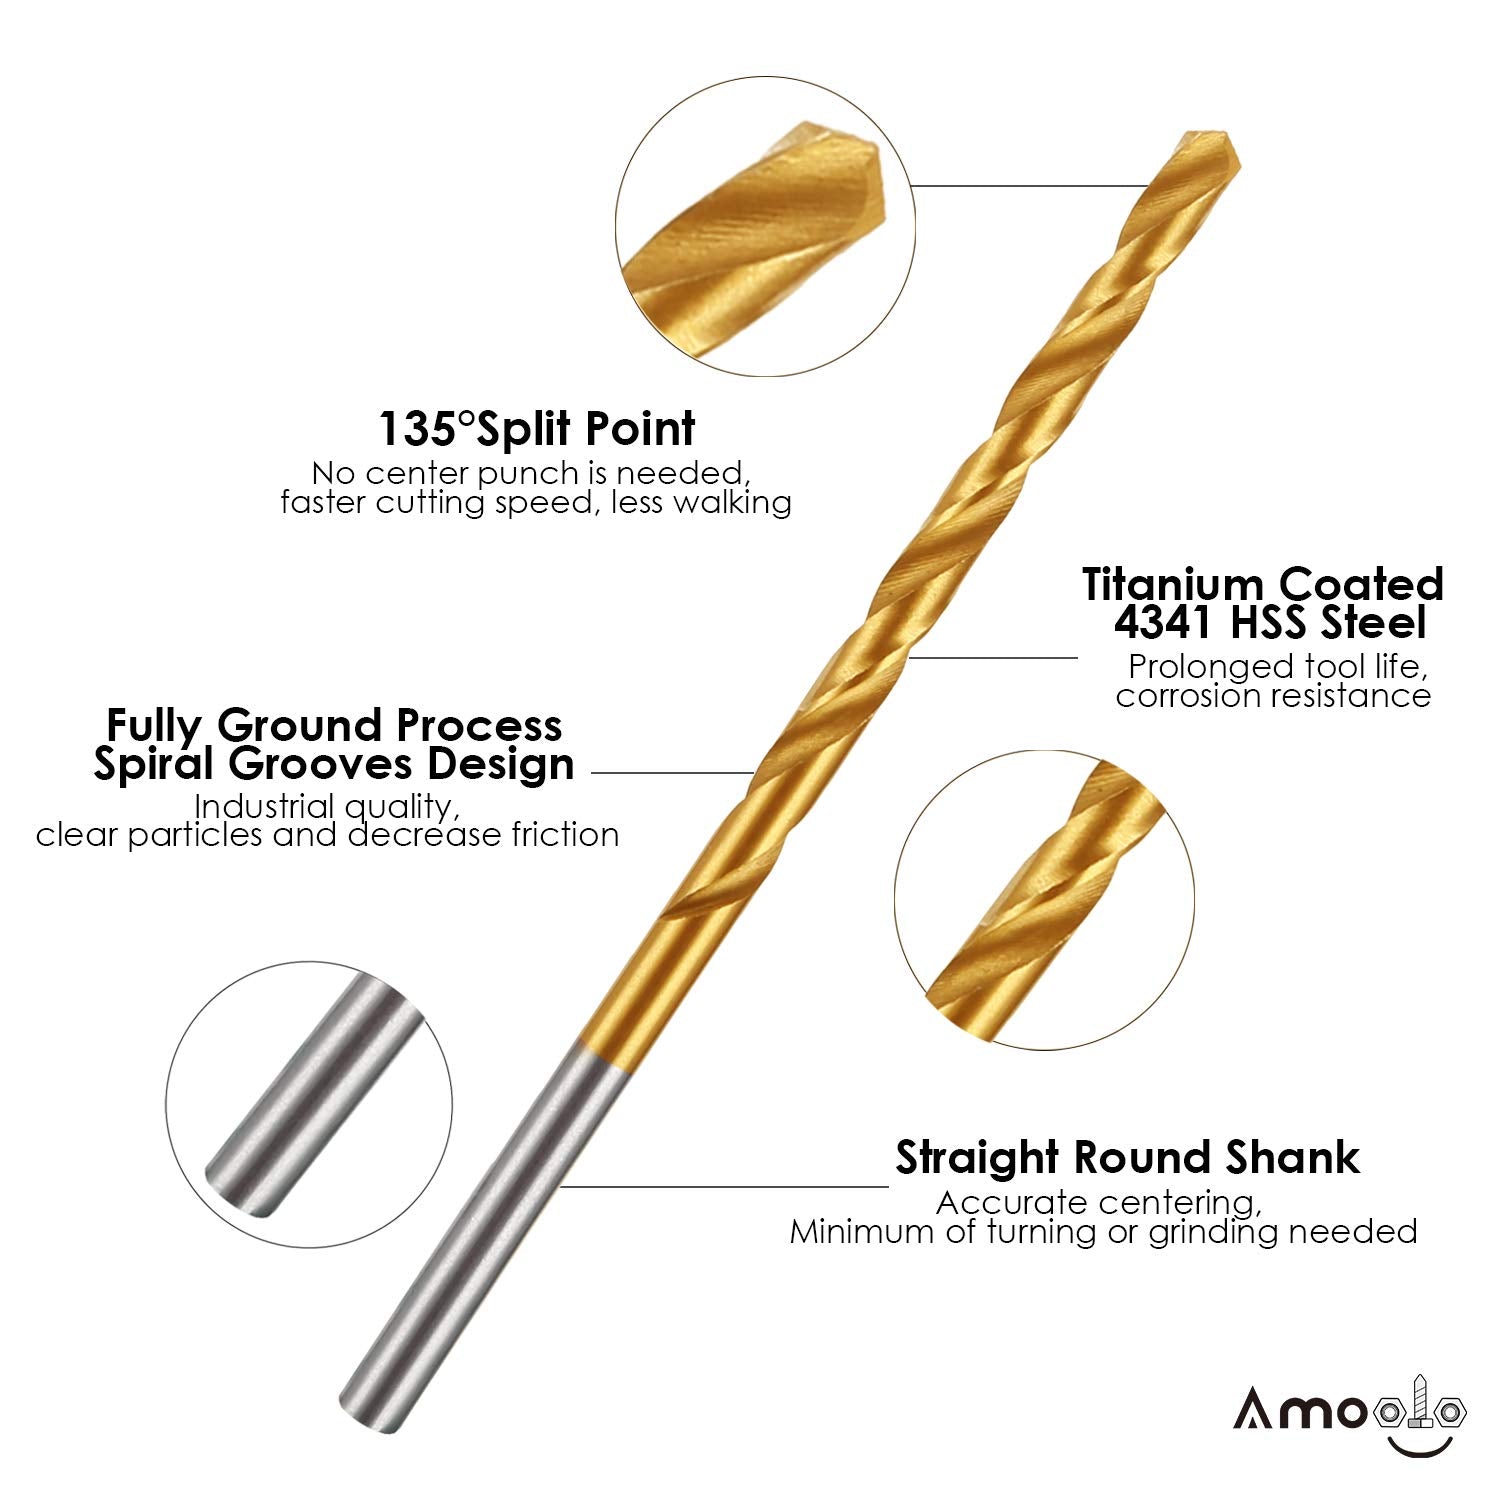 amoolo High Speed Steel Drill Bits, Titanium Coating, for Woodworking